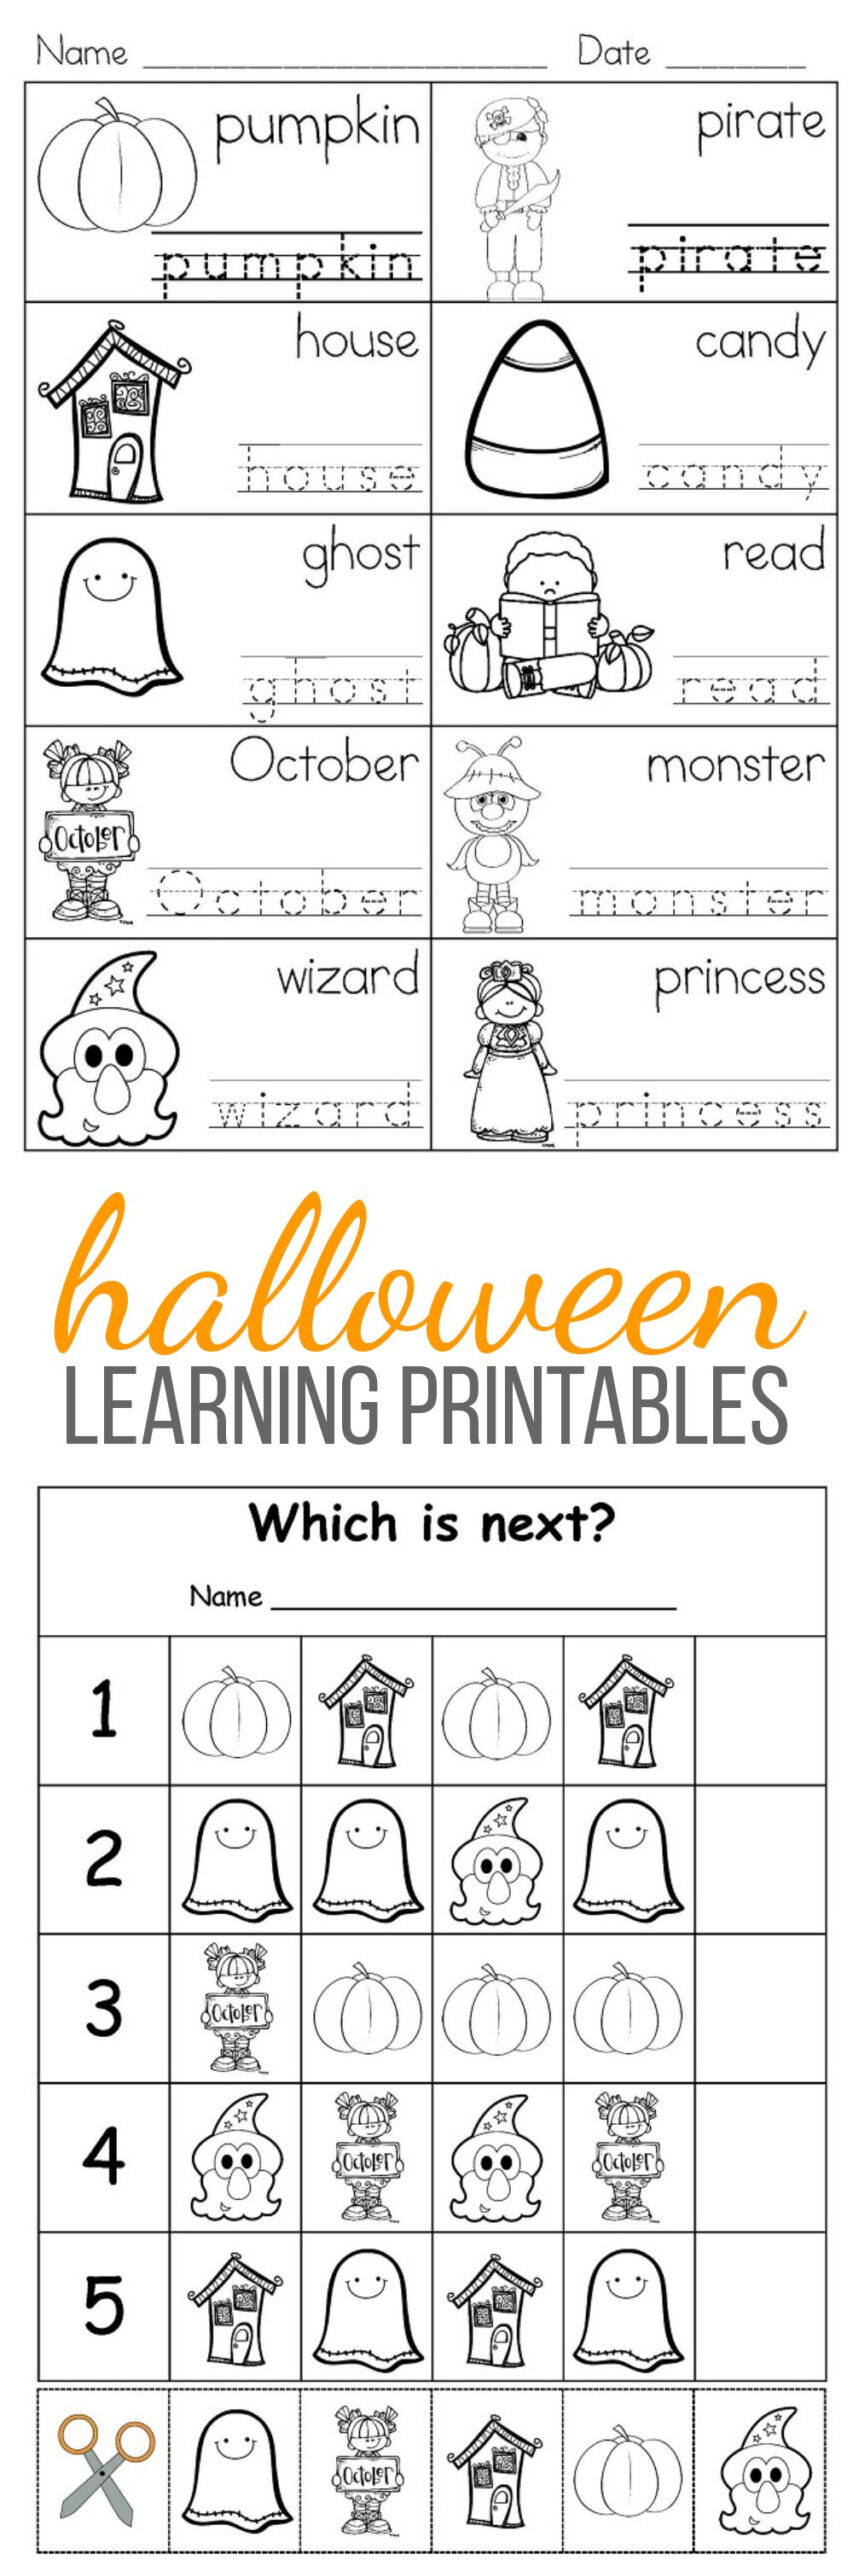 Halloween Free Learning Activities For Kids | Learning